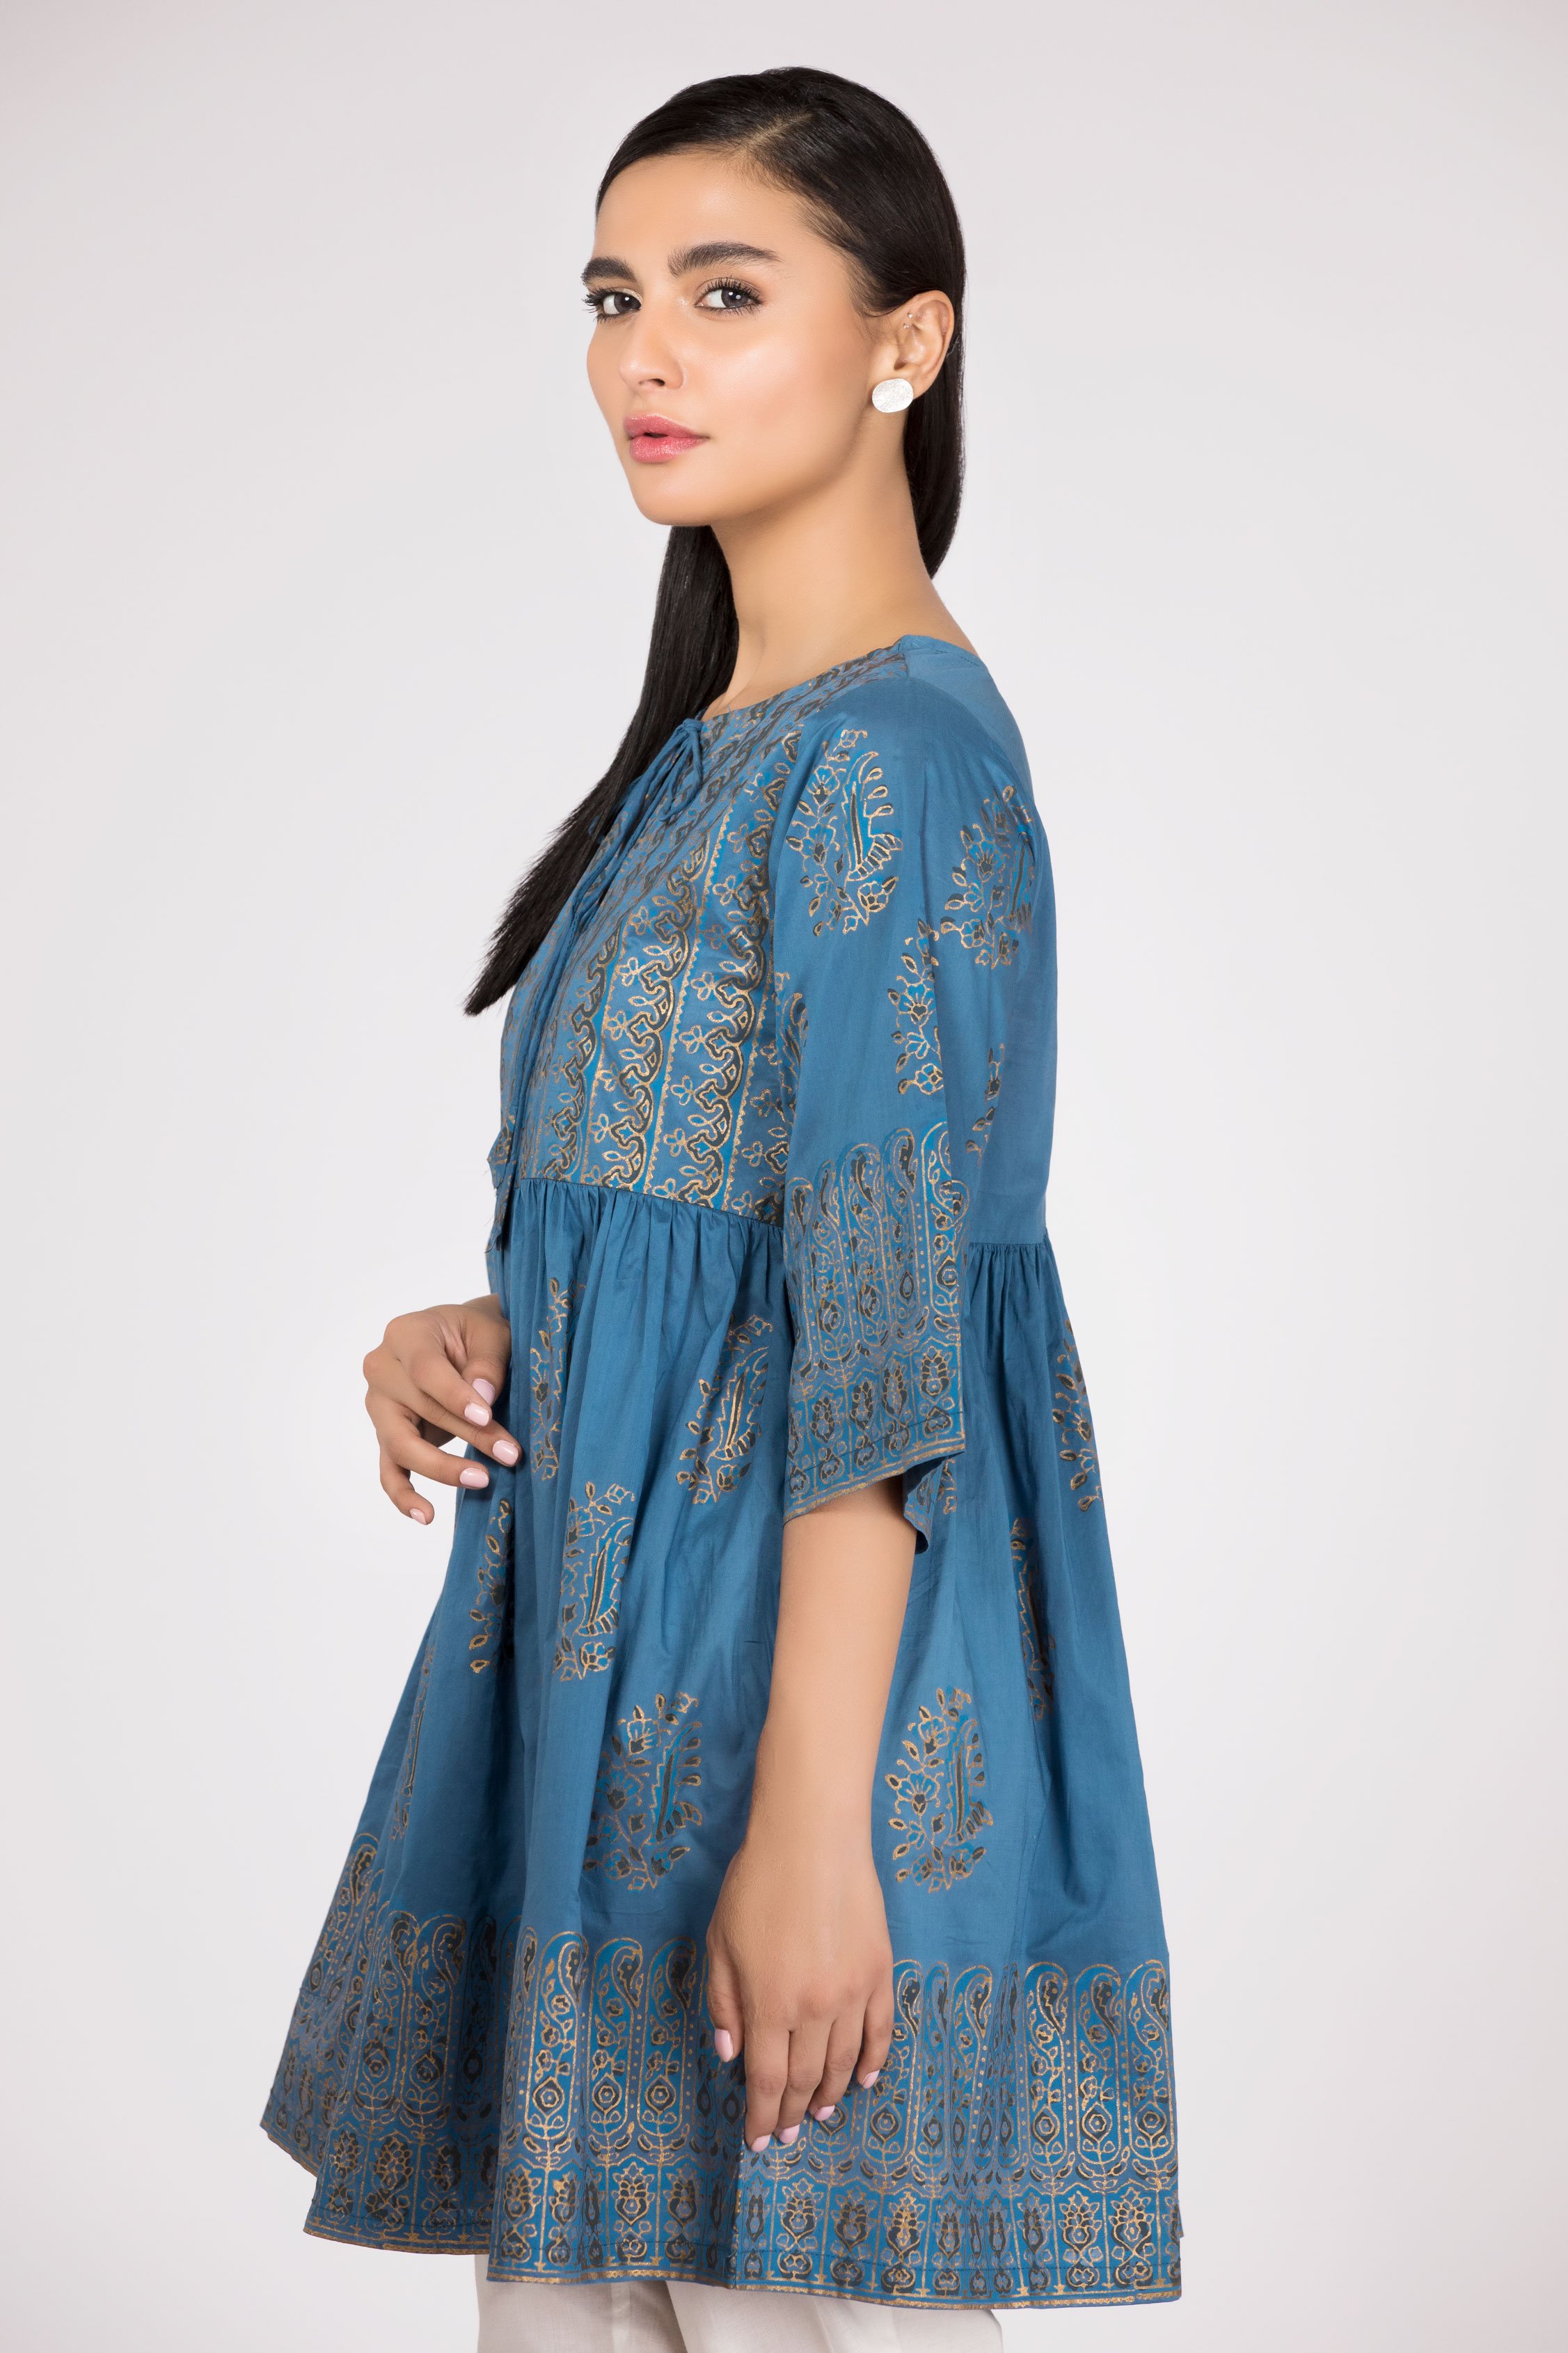 Buy this beautiful Pakistani dress in Dubai by Sapphire in cotton cambric